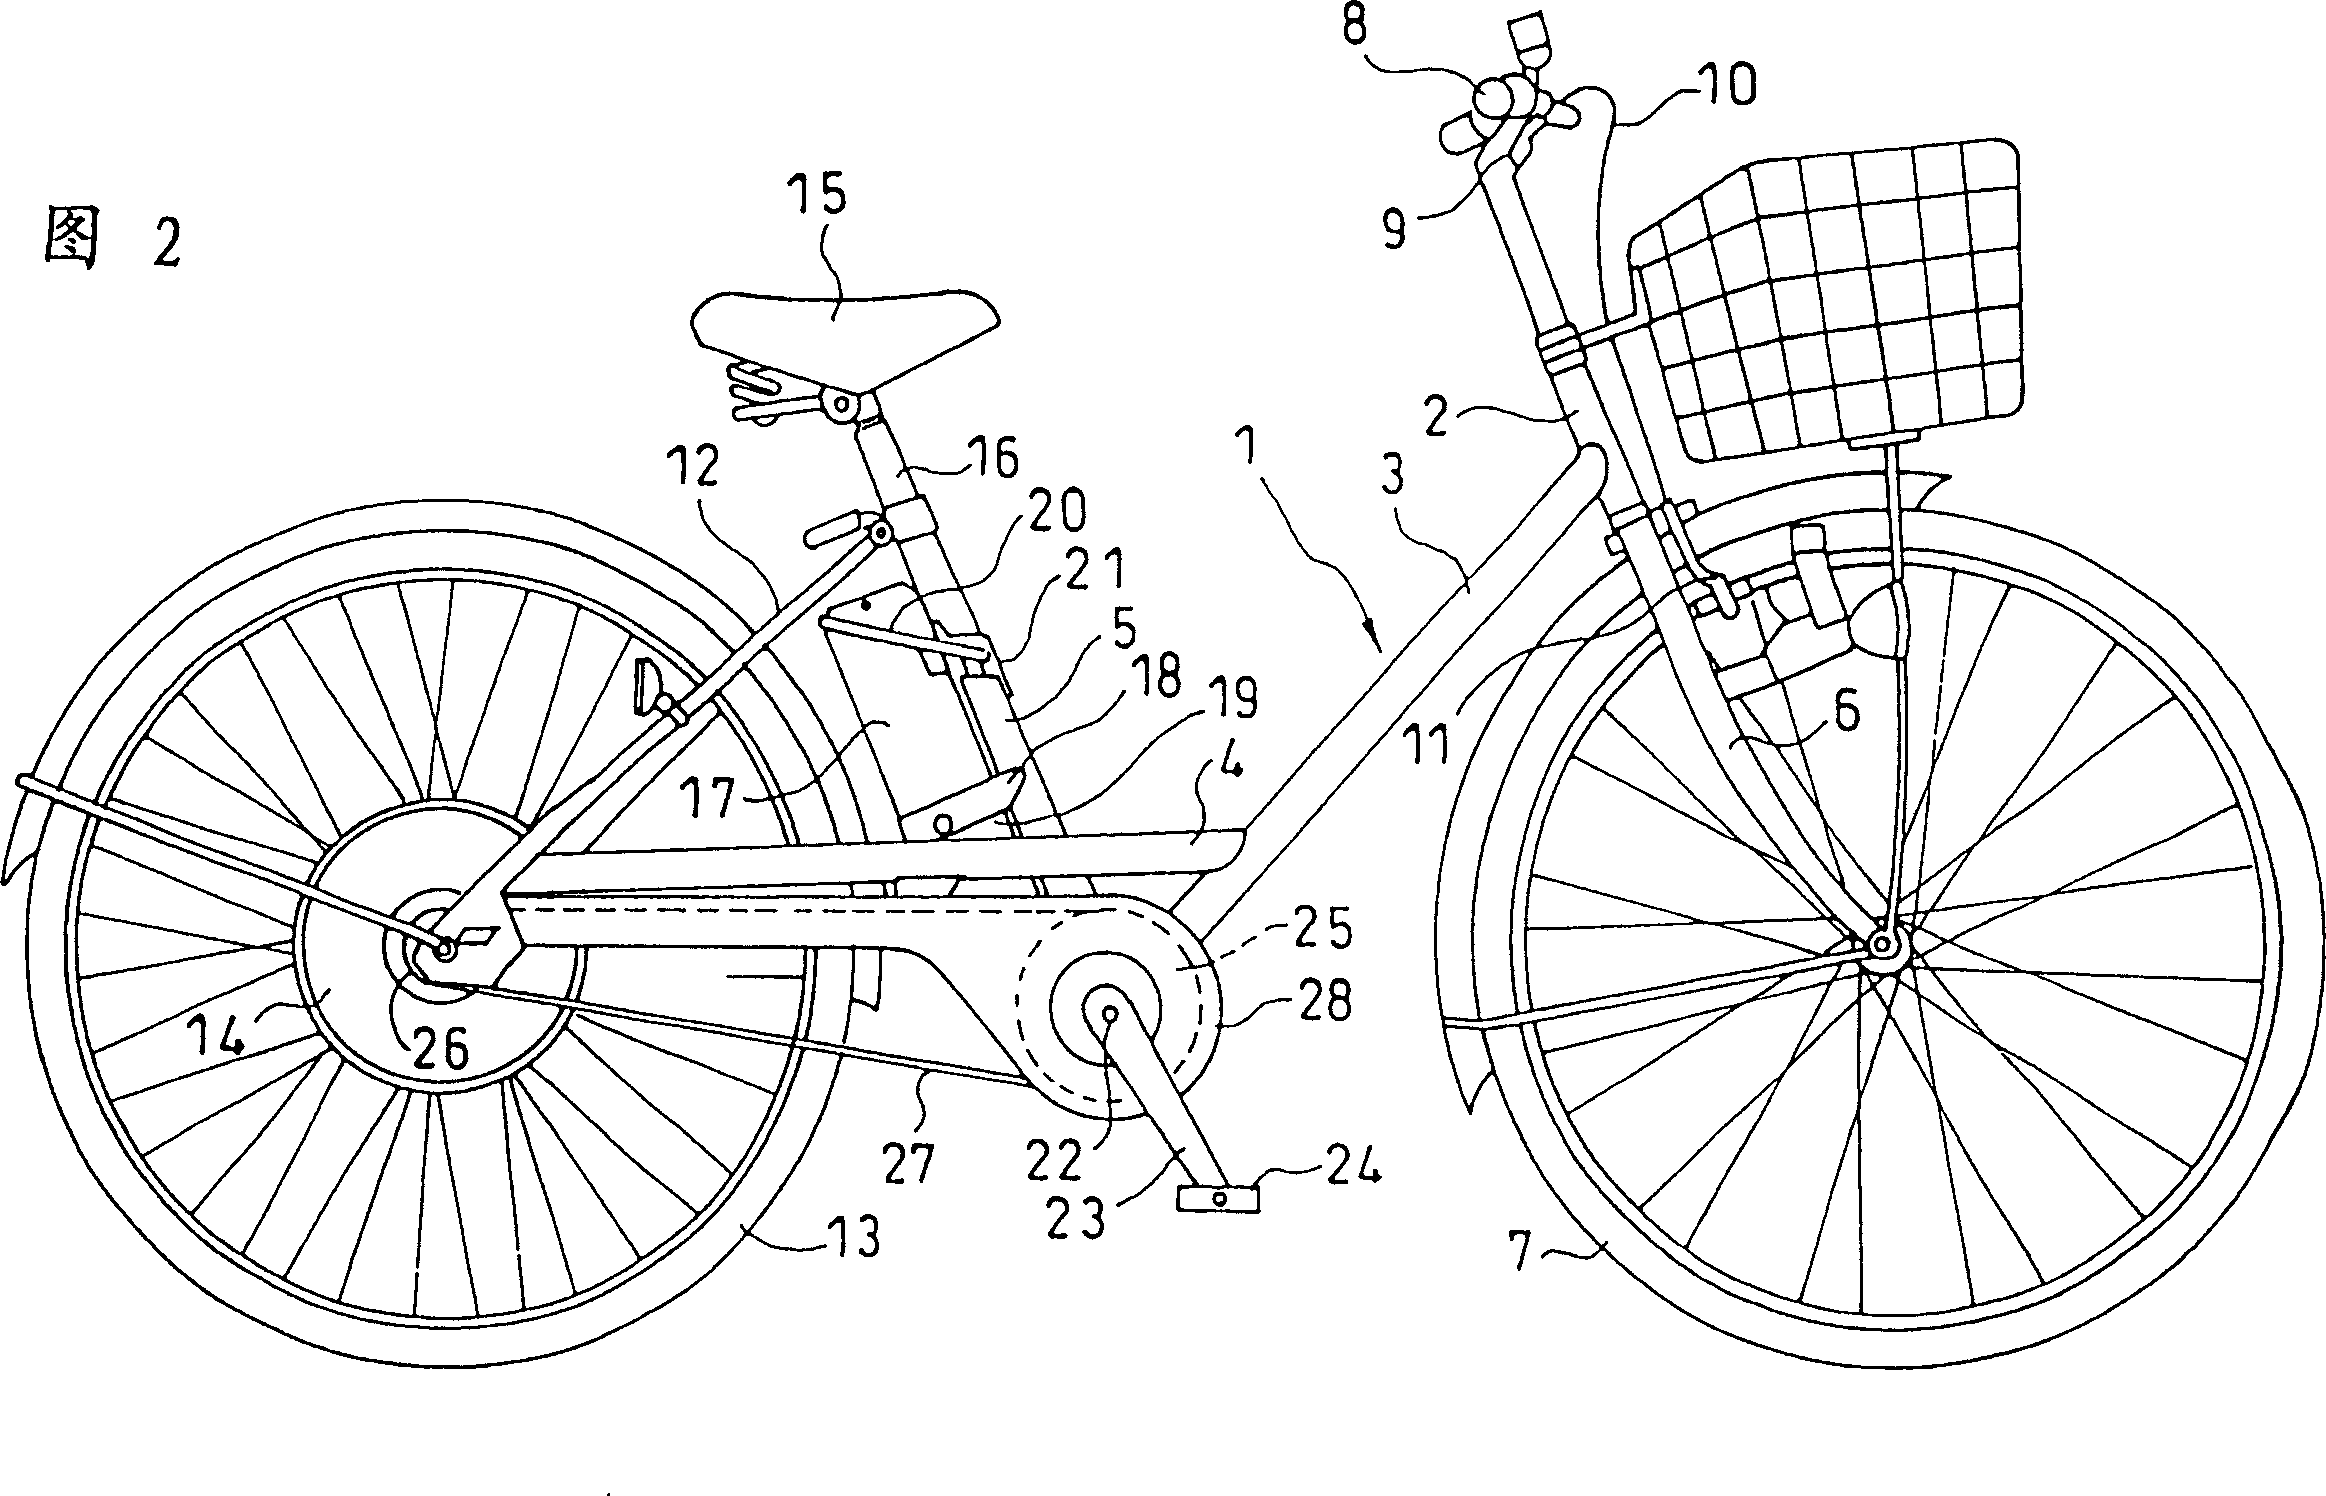 Motor-assisted bicycle